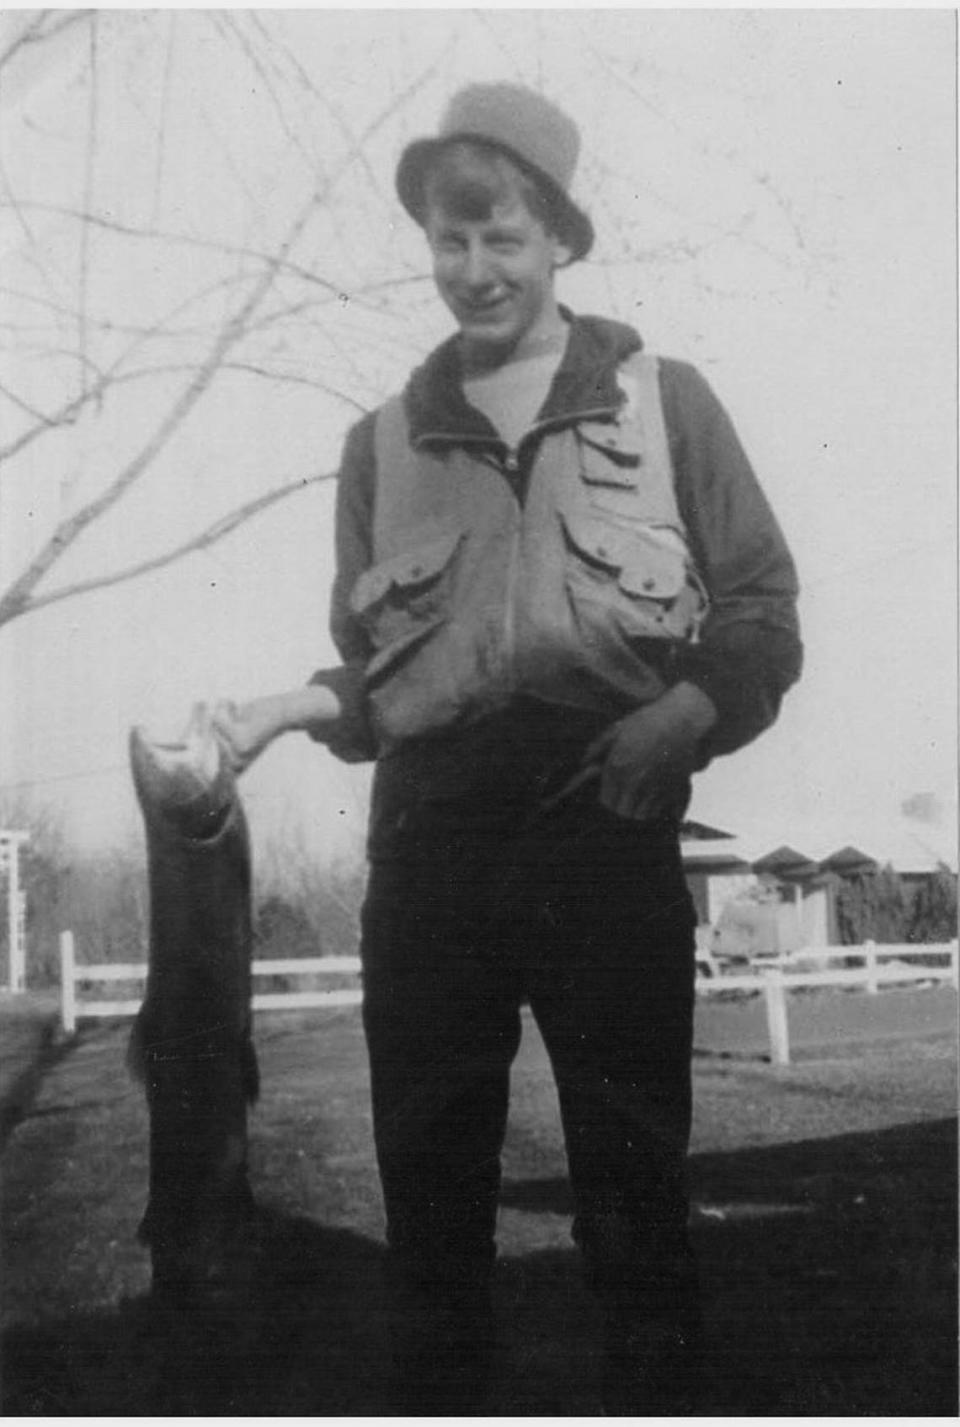 Some things Dennis Dauble has never forgot. Like his first steelhead.